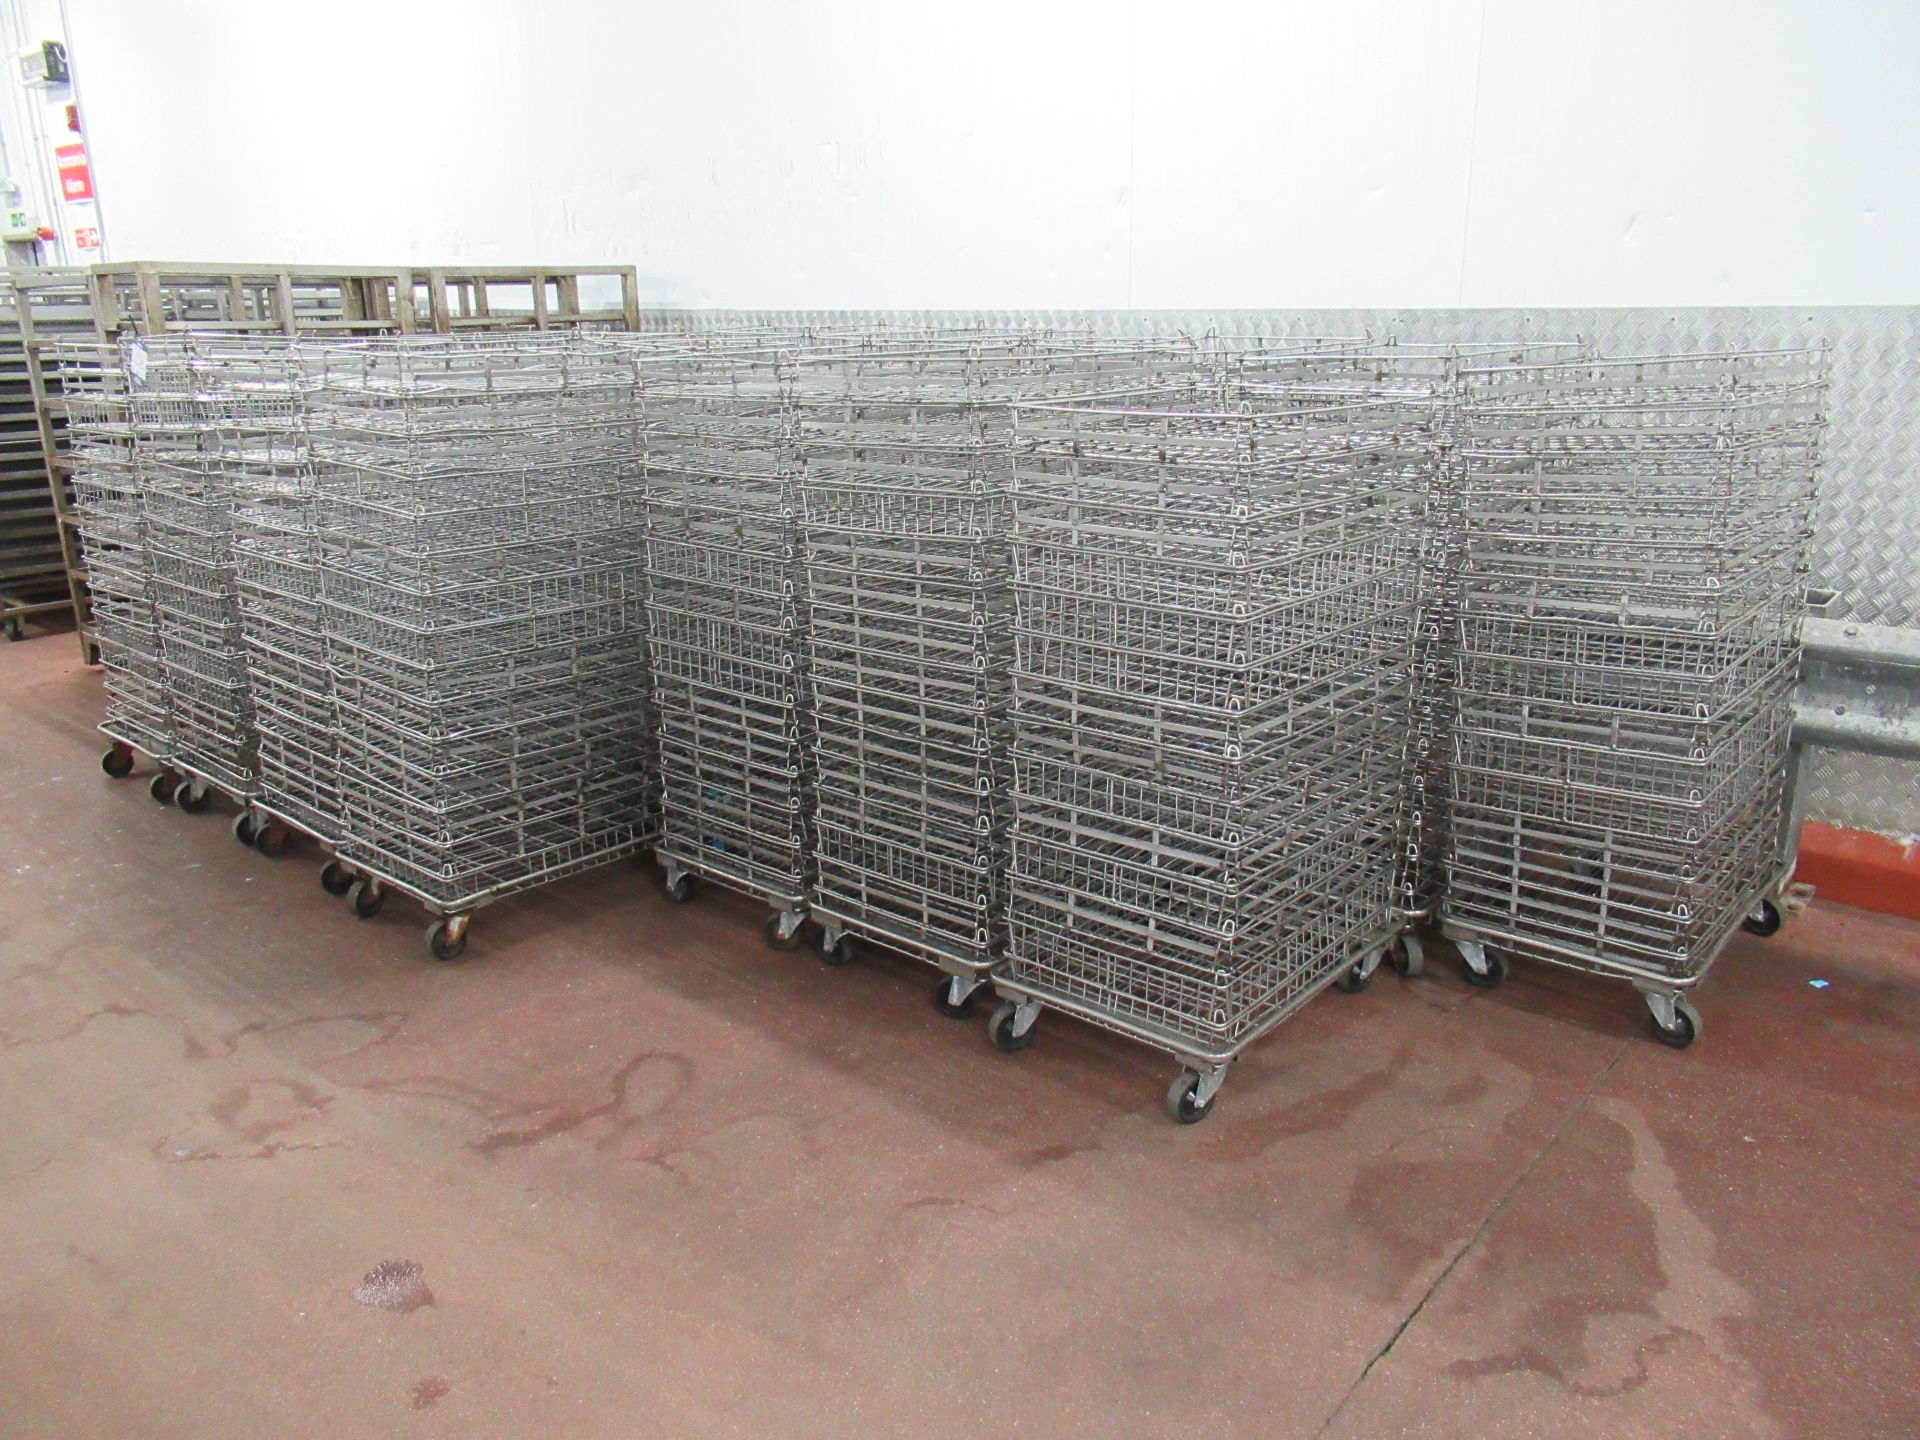 280 Stainless steel wire mesh stacking baskets, 800 x 520 x 75mm high, with 19 dollies - Image 2 of 5